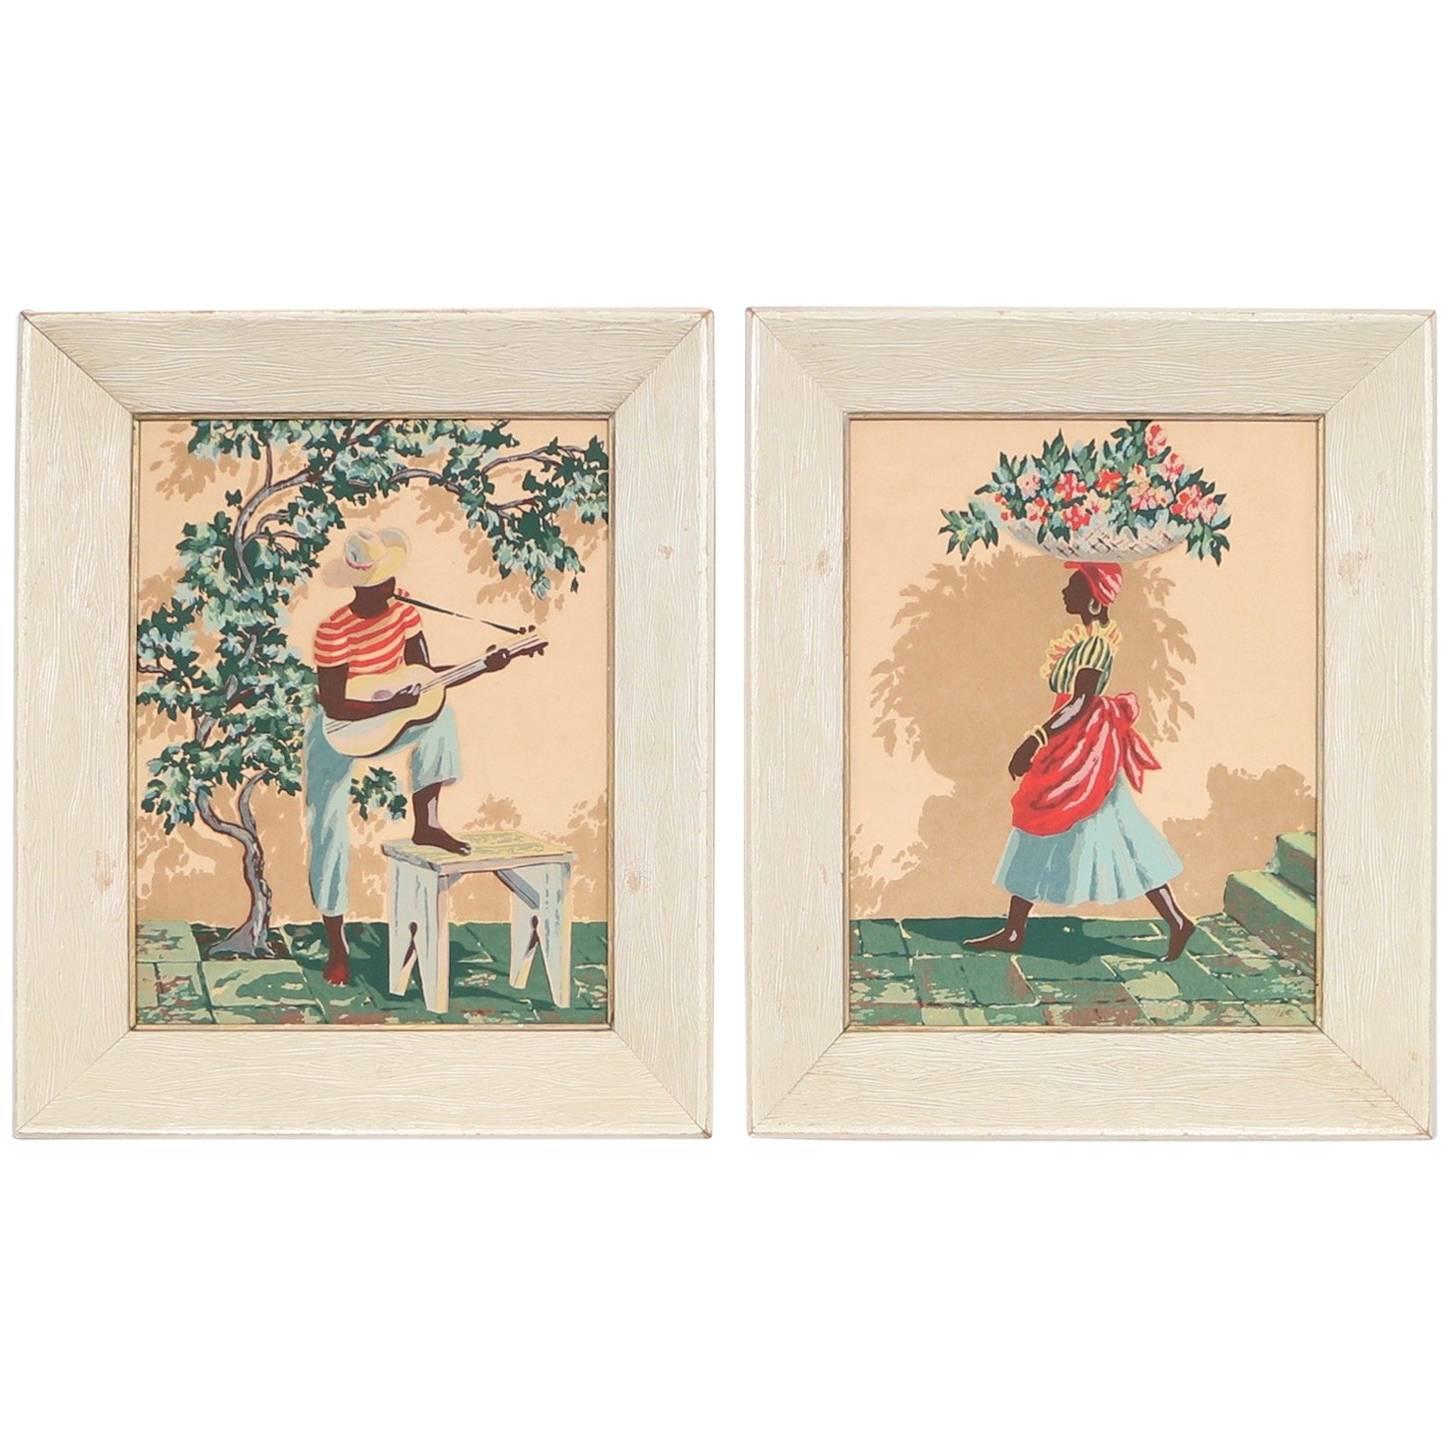 Pair of African-American Couple Paintings, Signed R. Mandeville